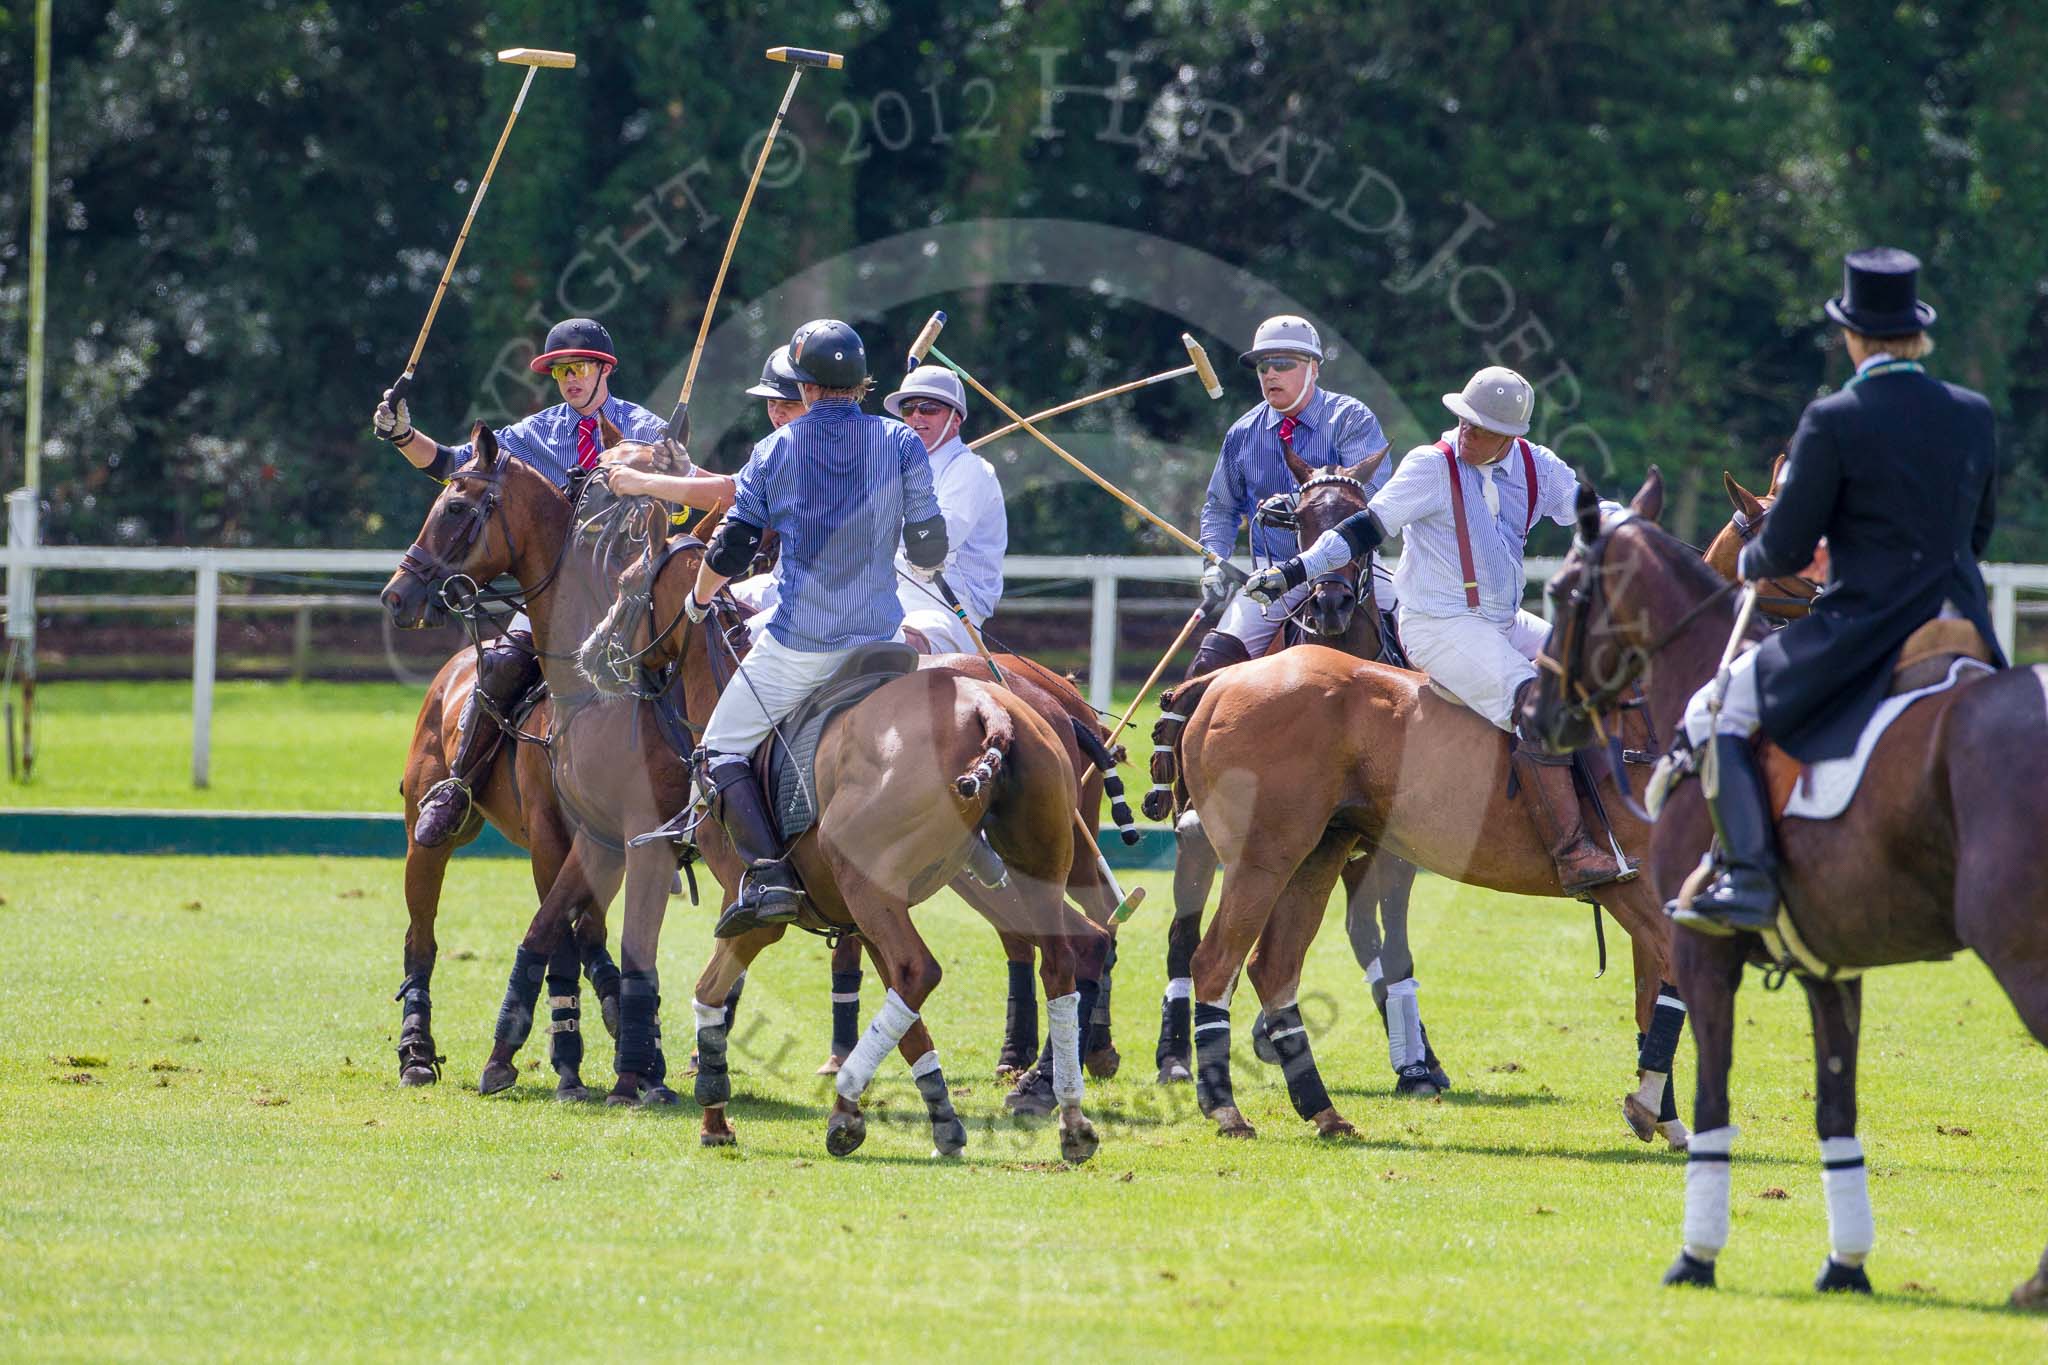 7th Heritage Polo Cup finals: Umpire Oli Hipwood observing all Players in protest..
Hurtwood Park Polo Club,
Ewhurst Green,
Surrey,
United Kingdom,
on 05 August 2012 at 14:10, image #68